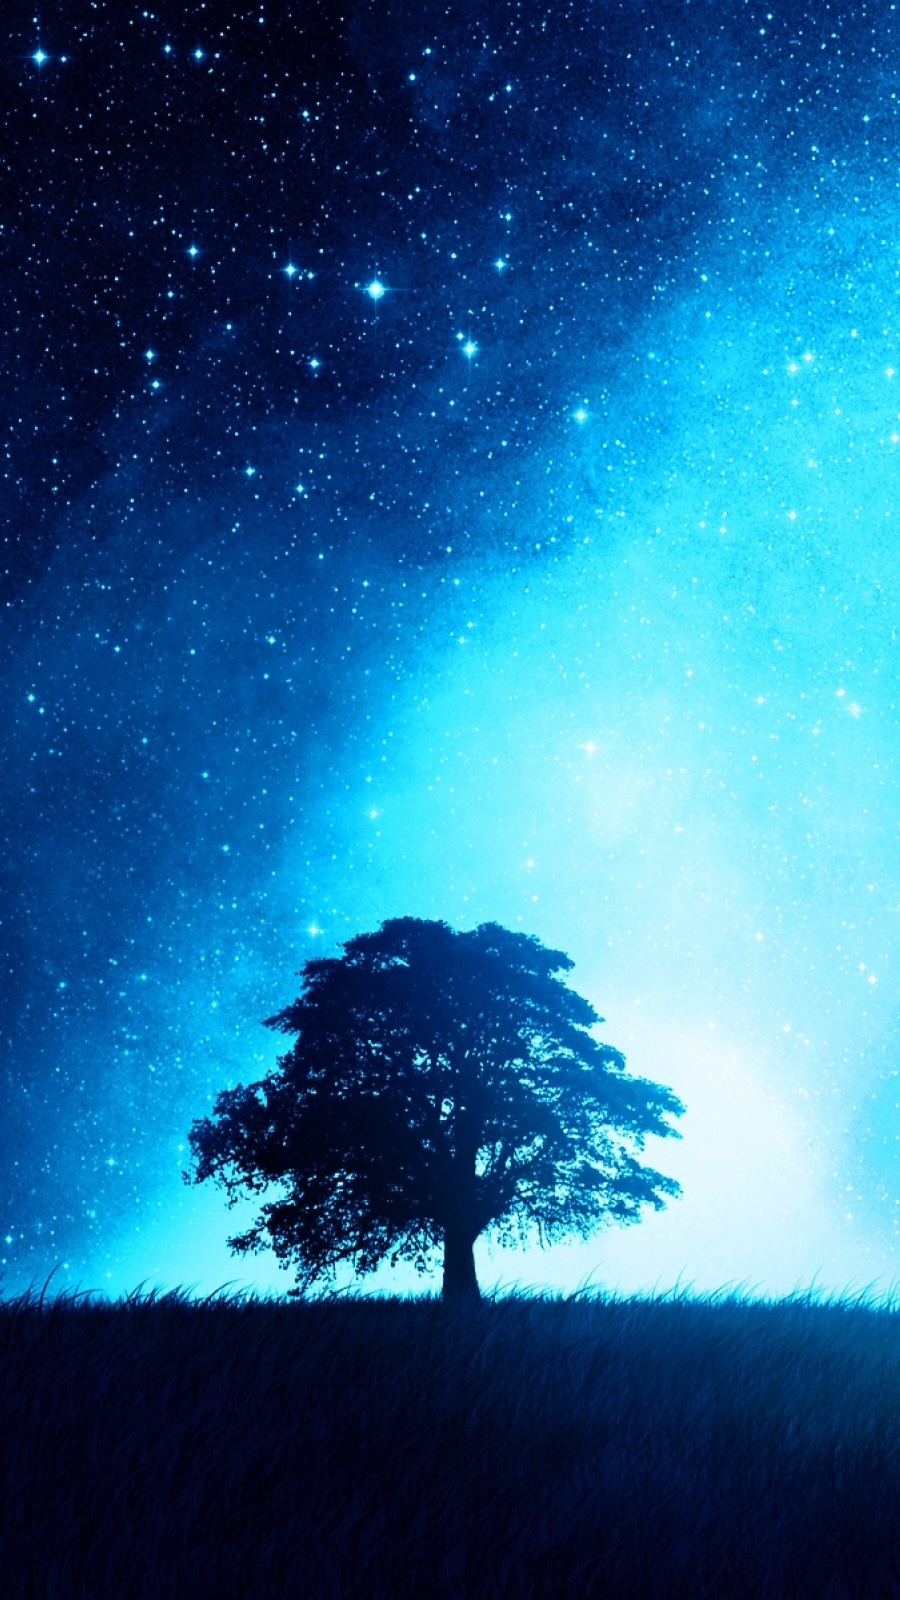 sky wallpaper for iphone,sky,nature,natural landscape,tree,atmosphere